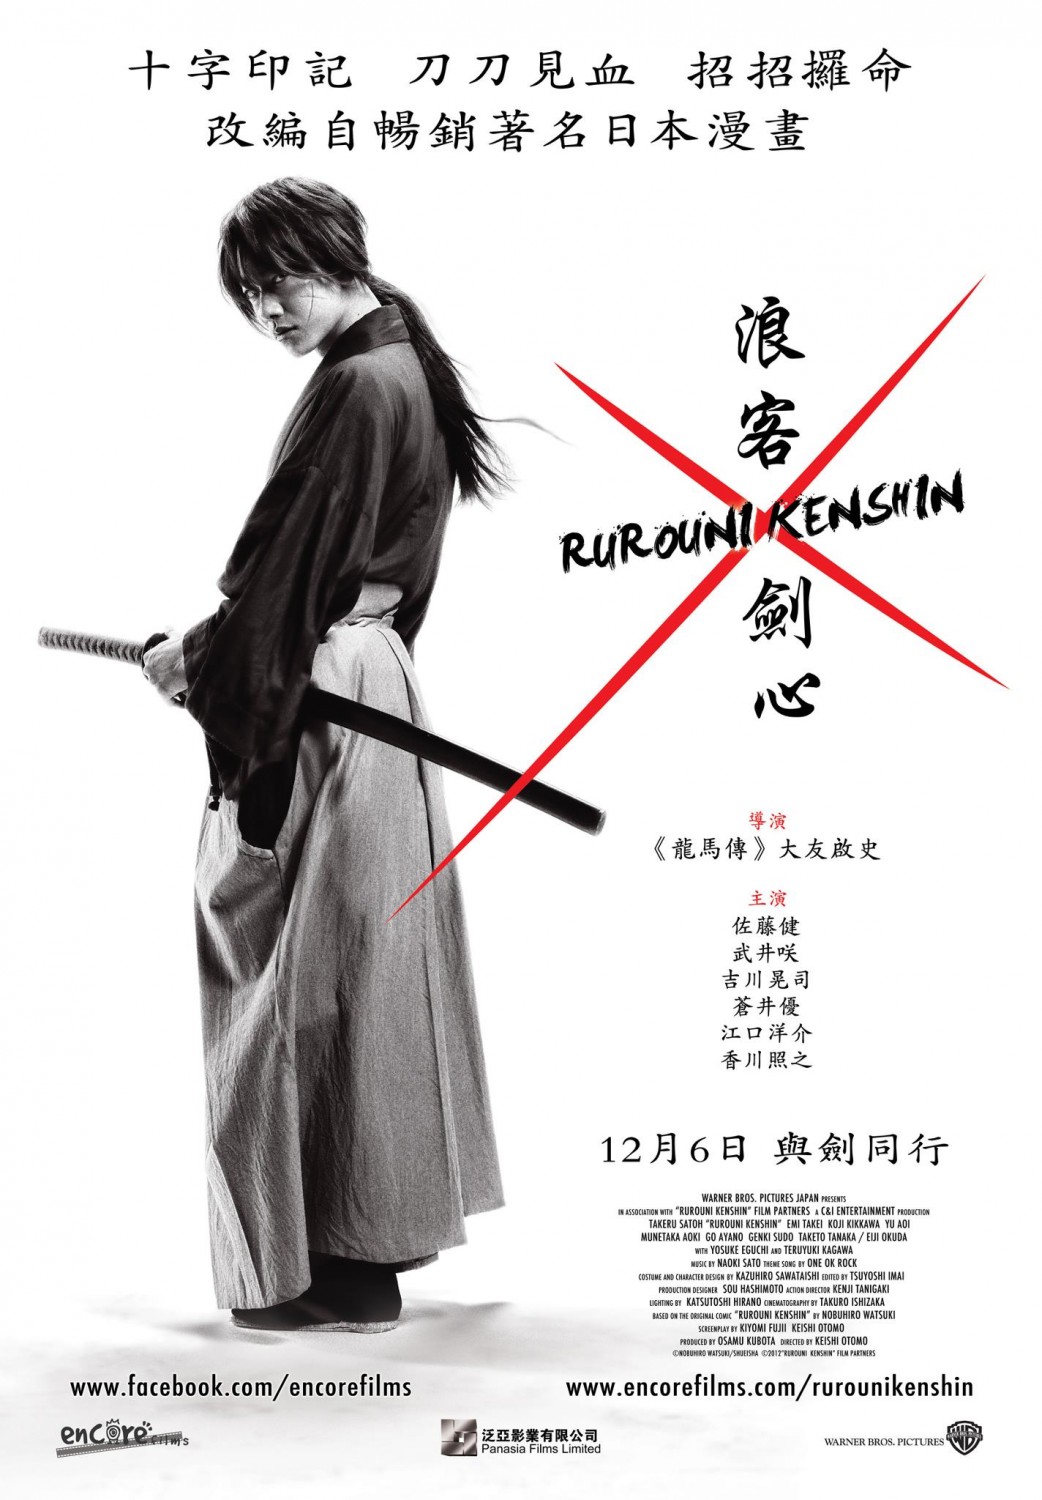 Extra Large Movie Poster Image for Rurouni Kenshin (#2 of 2)